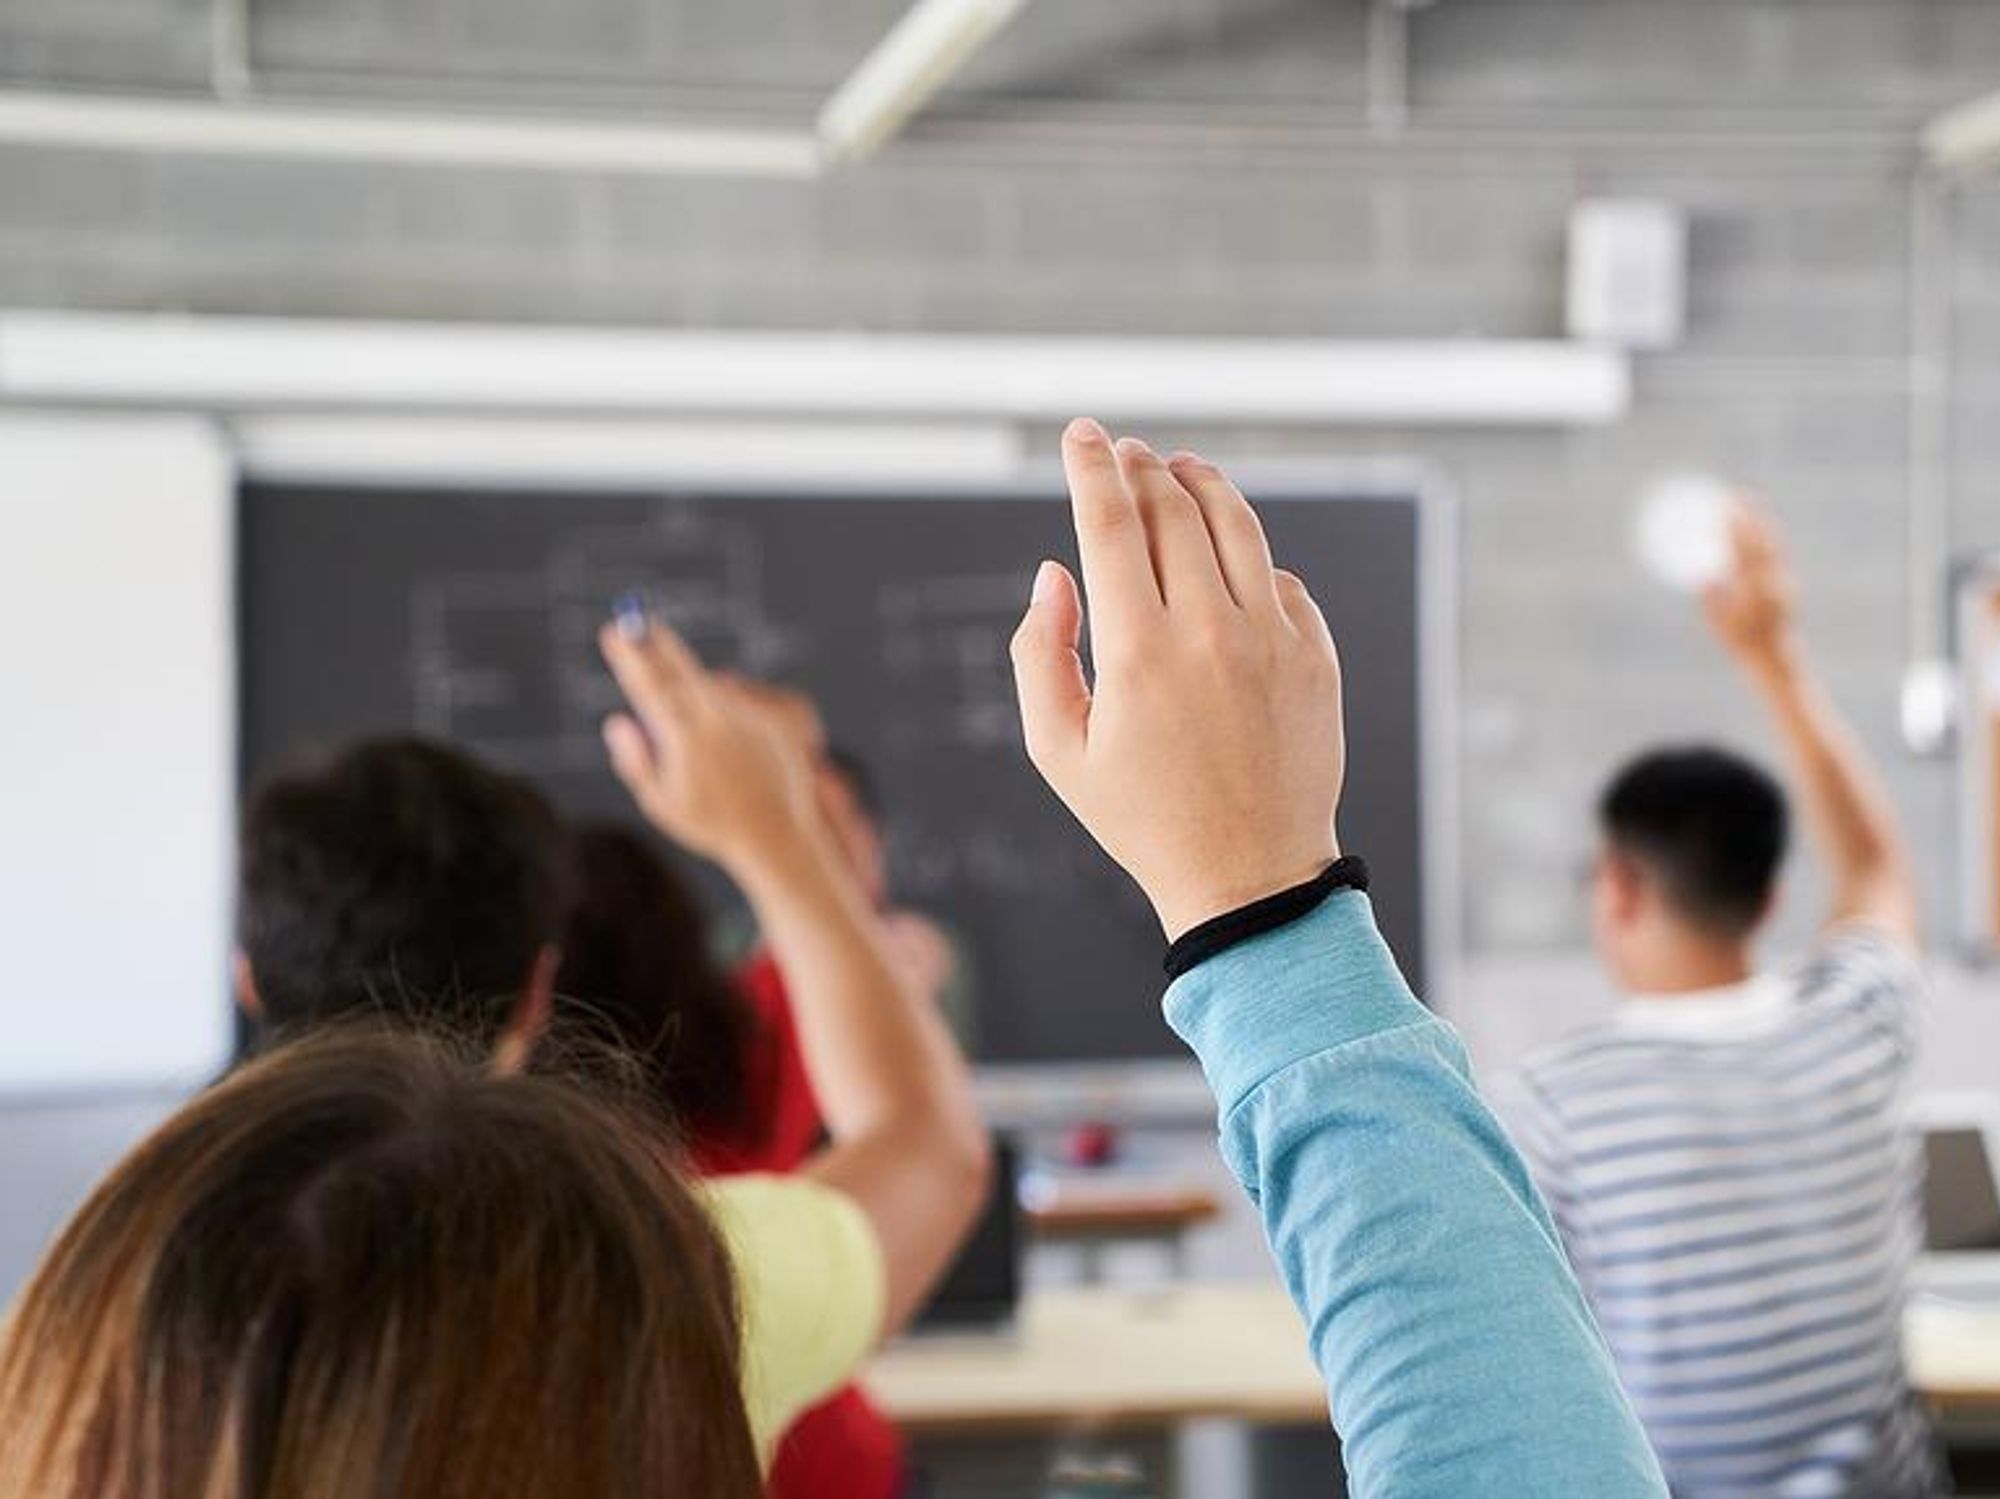 Engaged students raise their hands in class